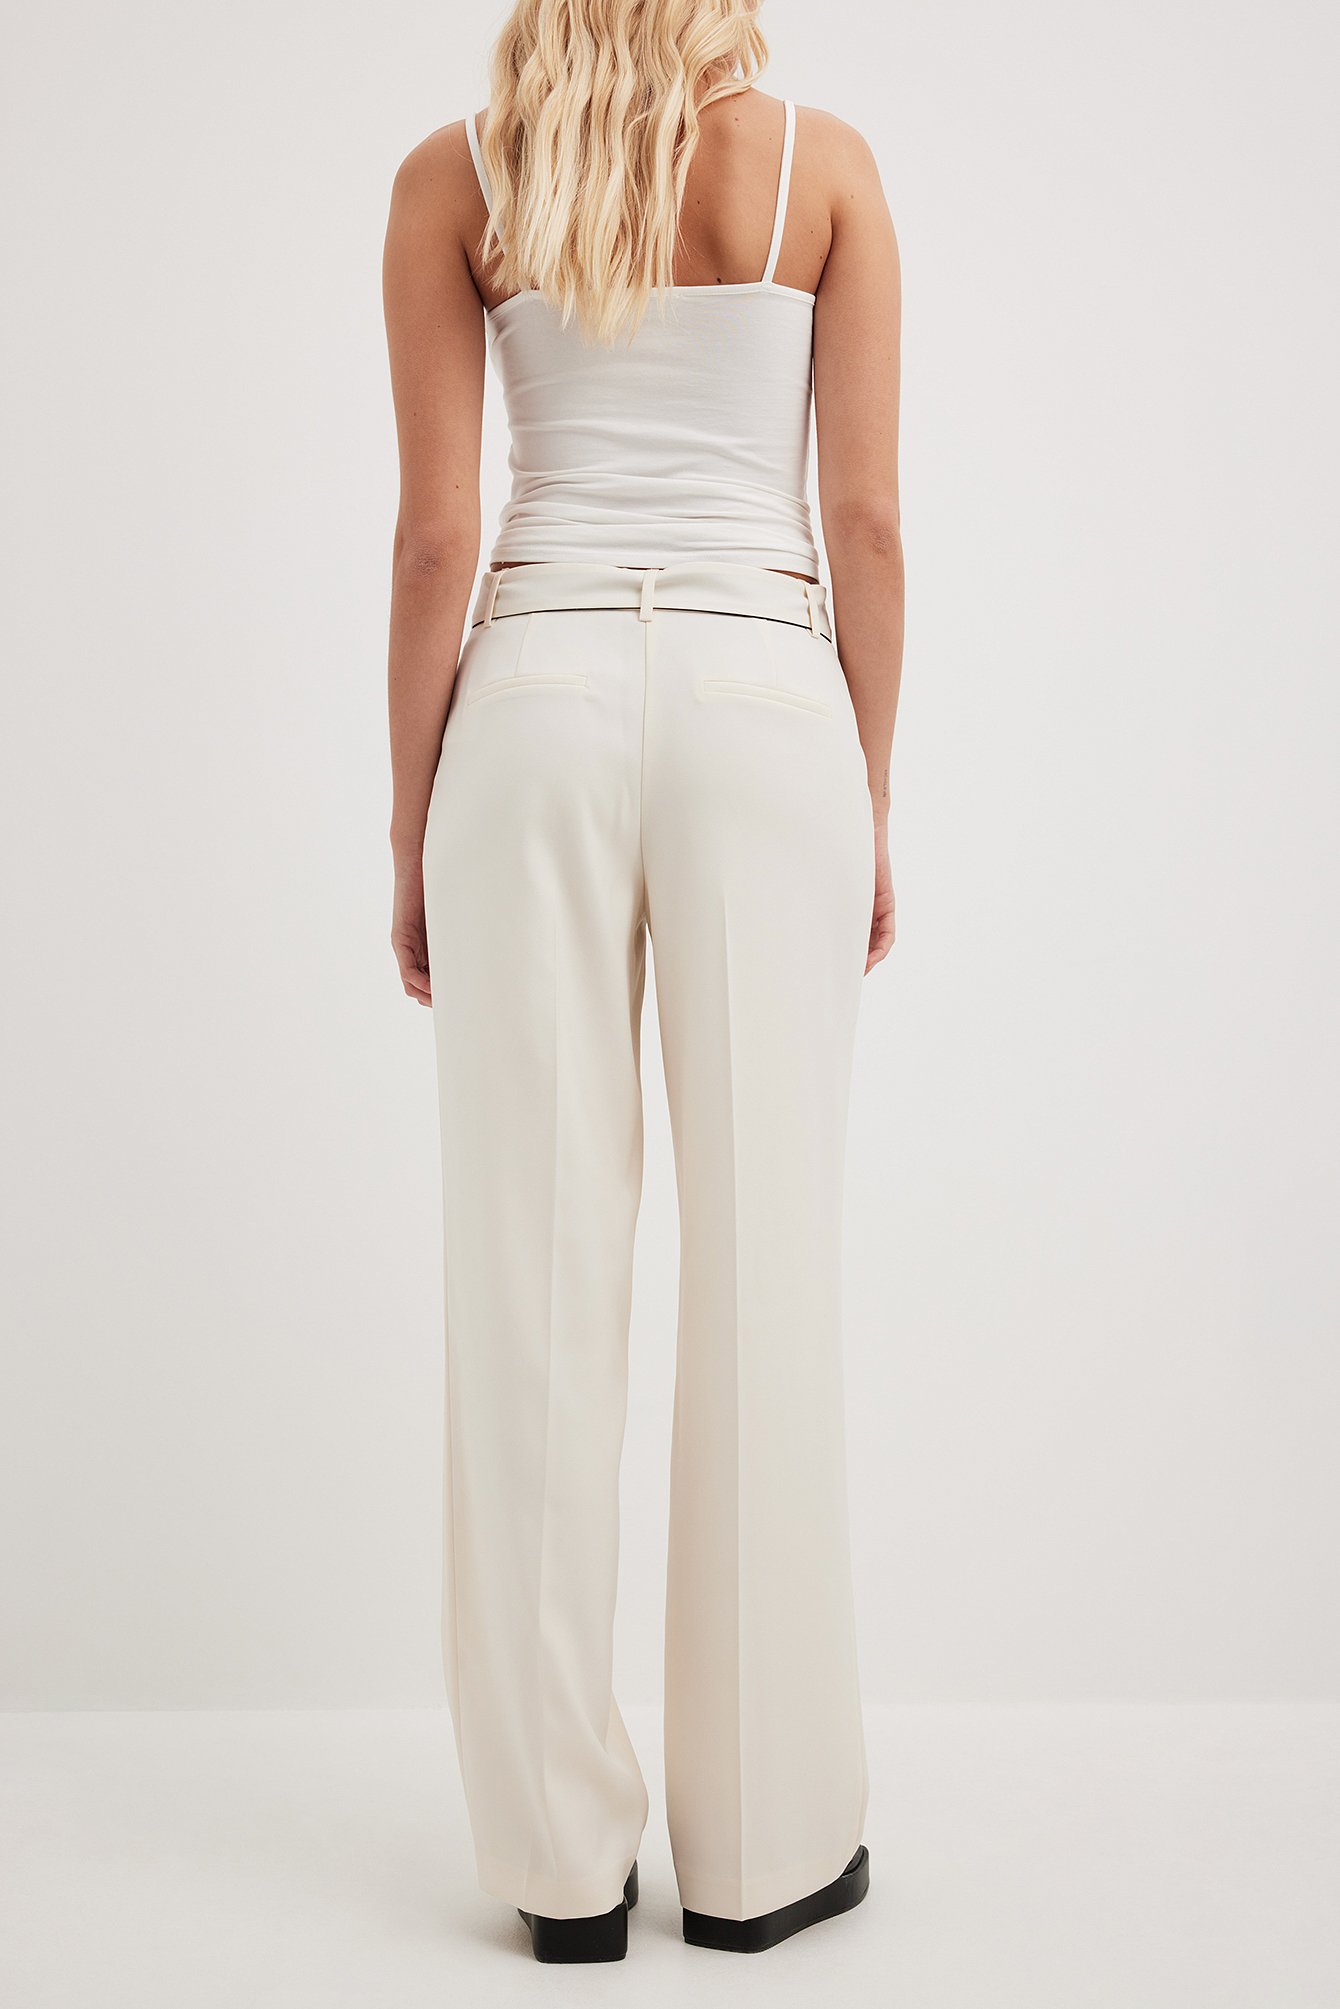 Missguided Tall co-ord ribbed belted trousers in white | ASOS